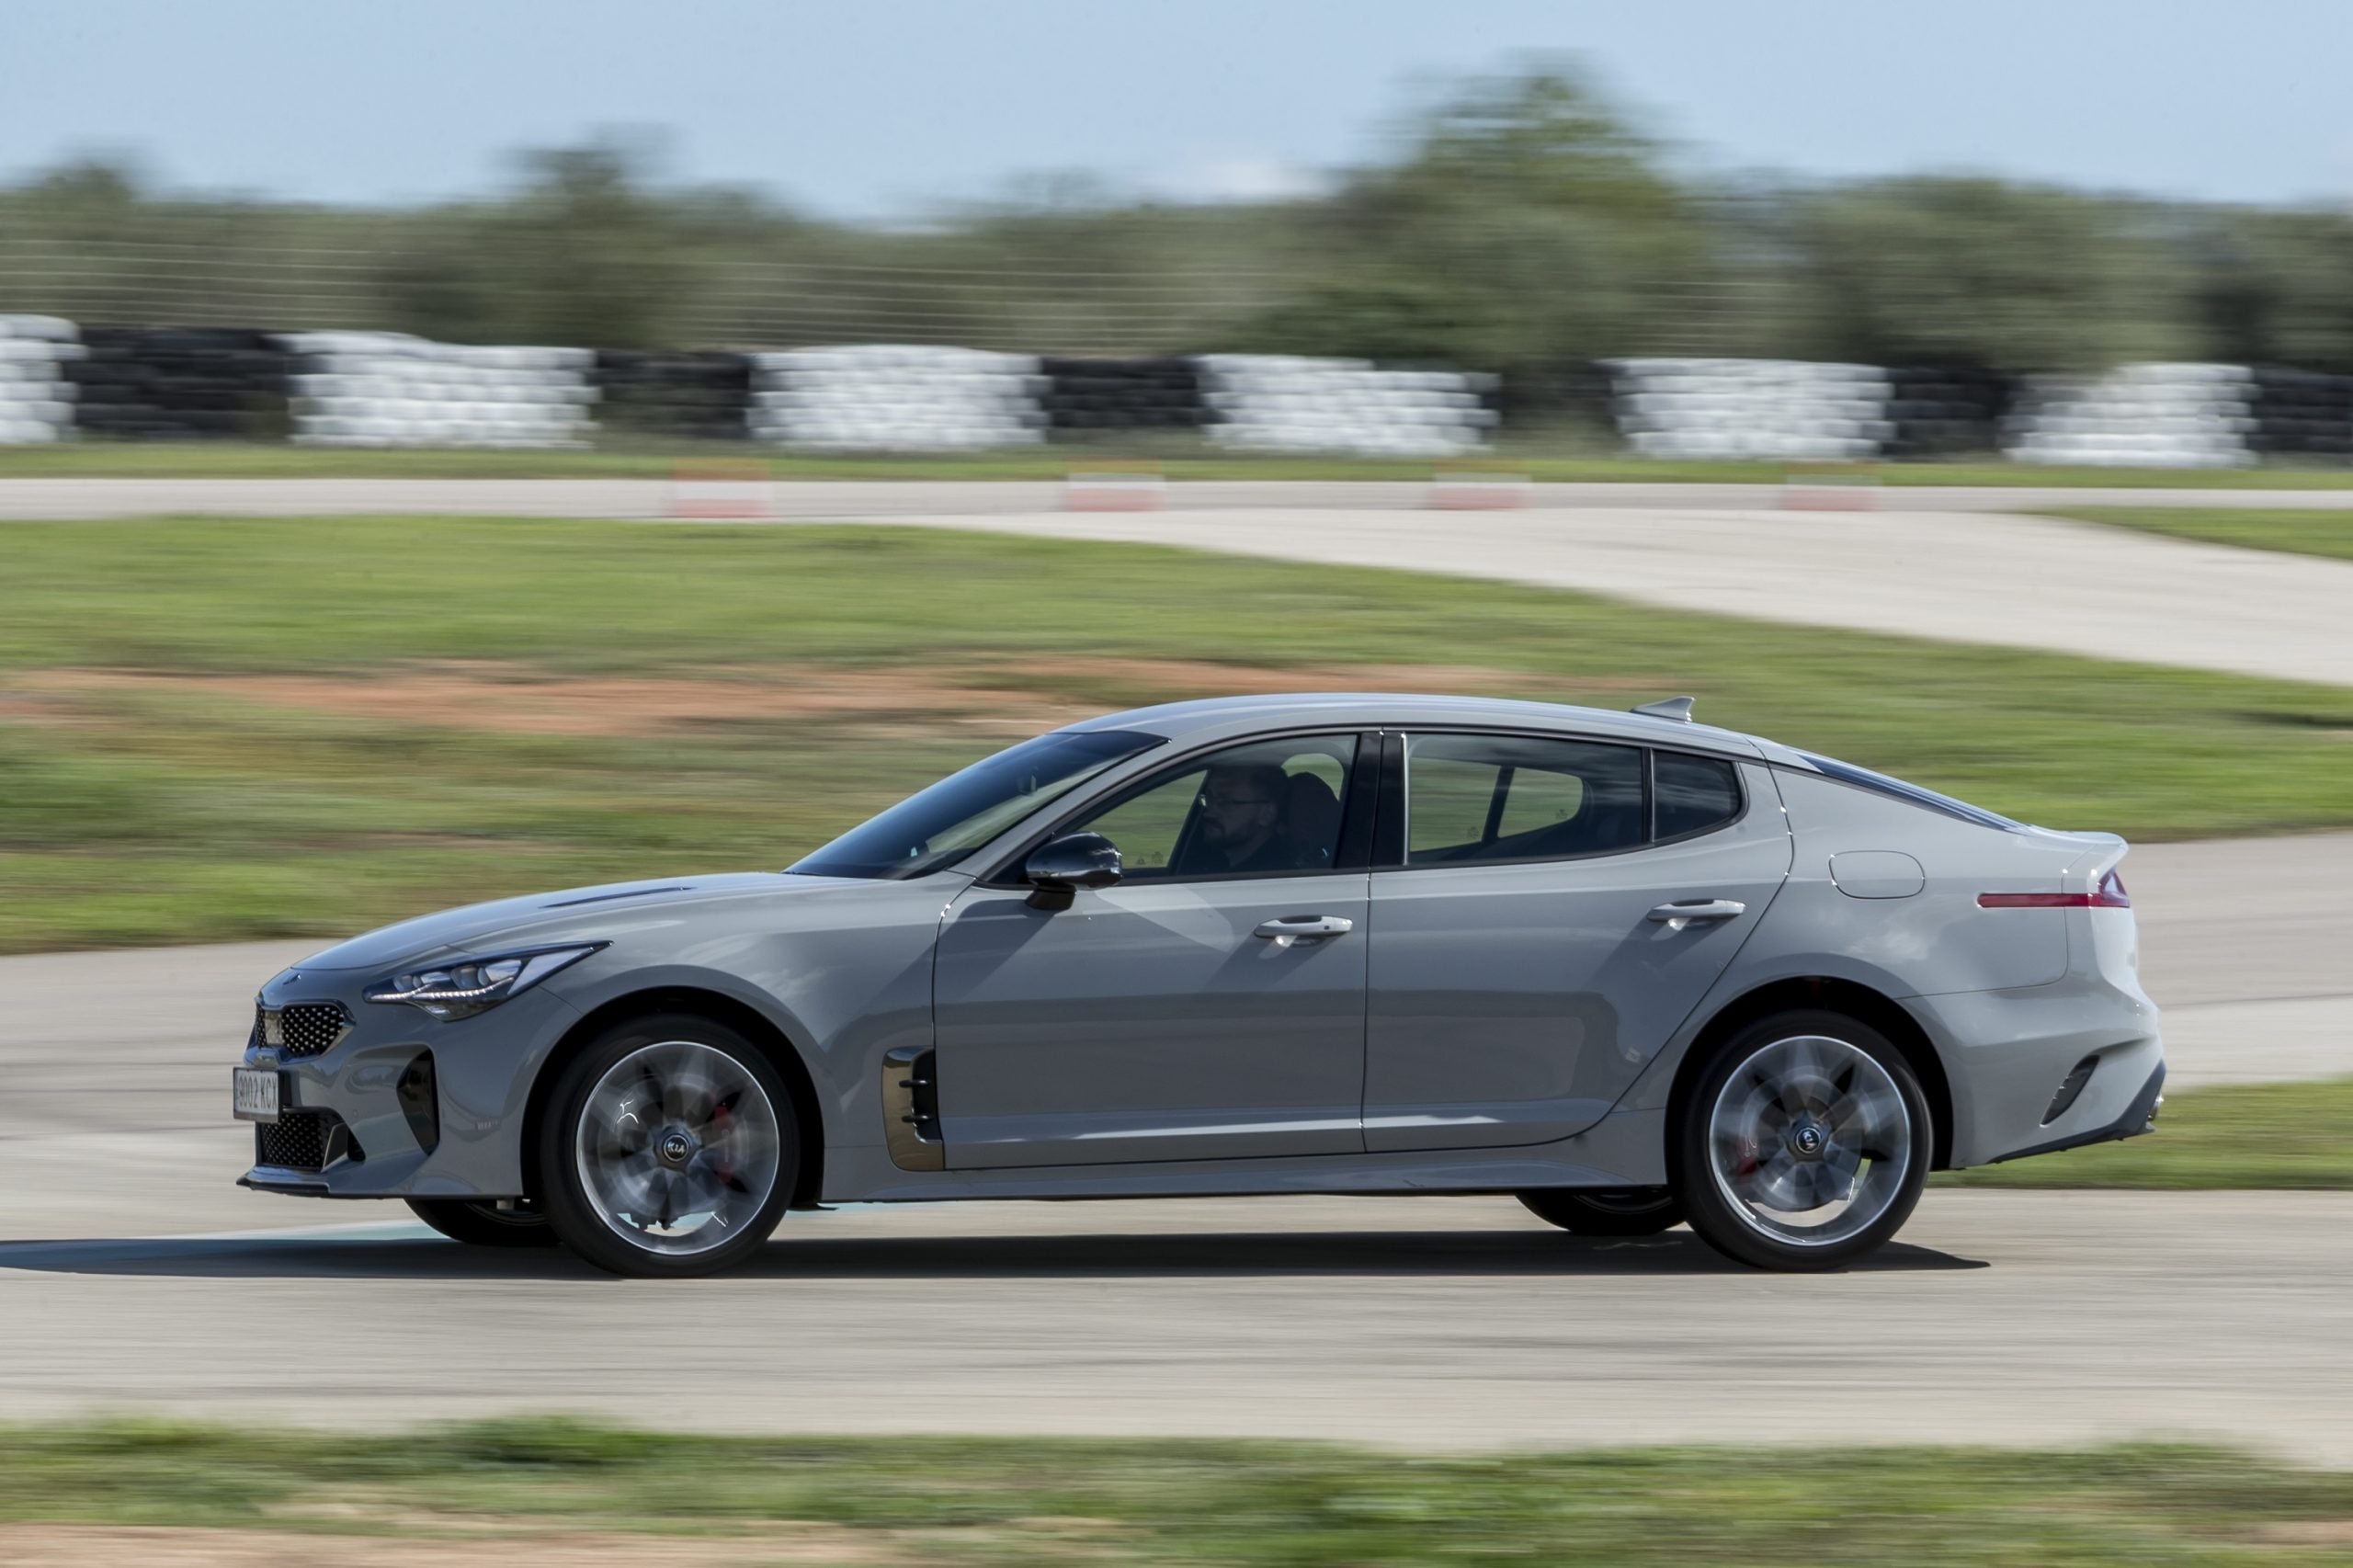 A grey Stinger races down a test track, shot in profile